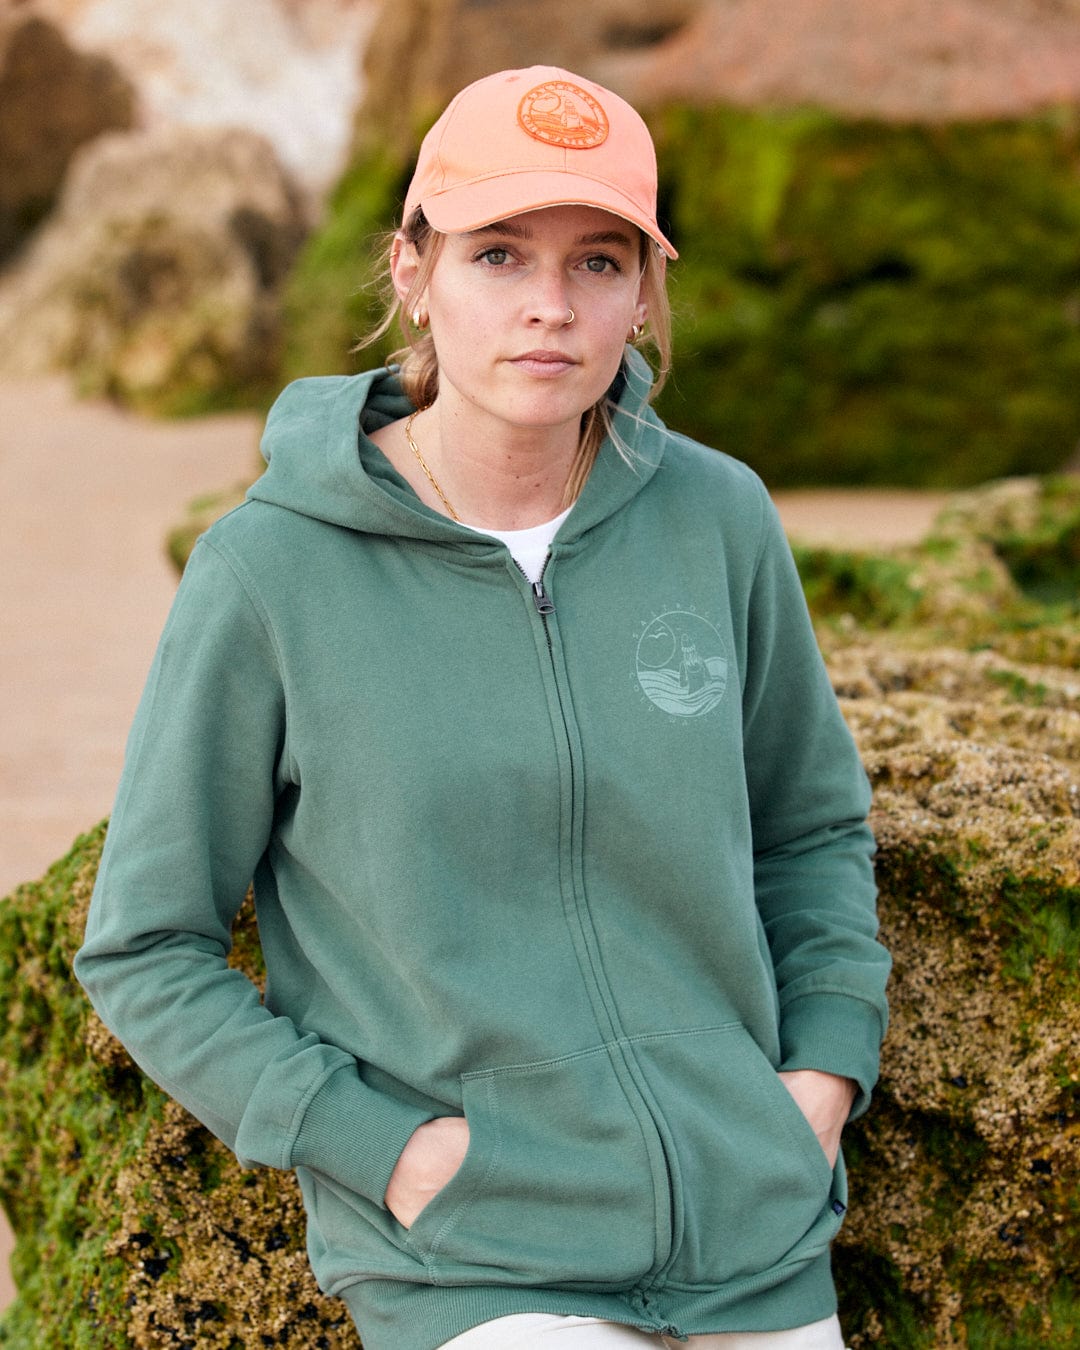 A young woman wearing a green hoodie and a Saltrock Cold Water Club cap in orange with a curved visor stands outdoors with rocky formations in the background.